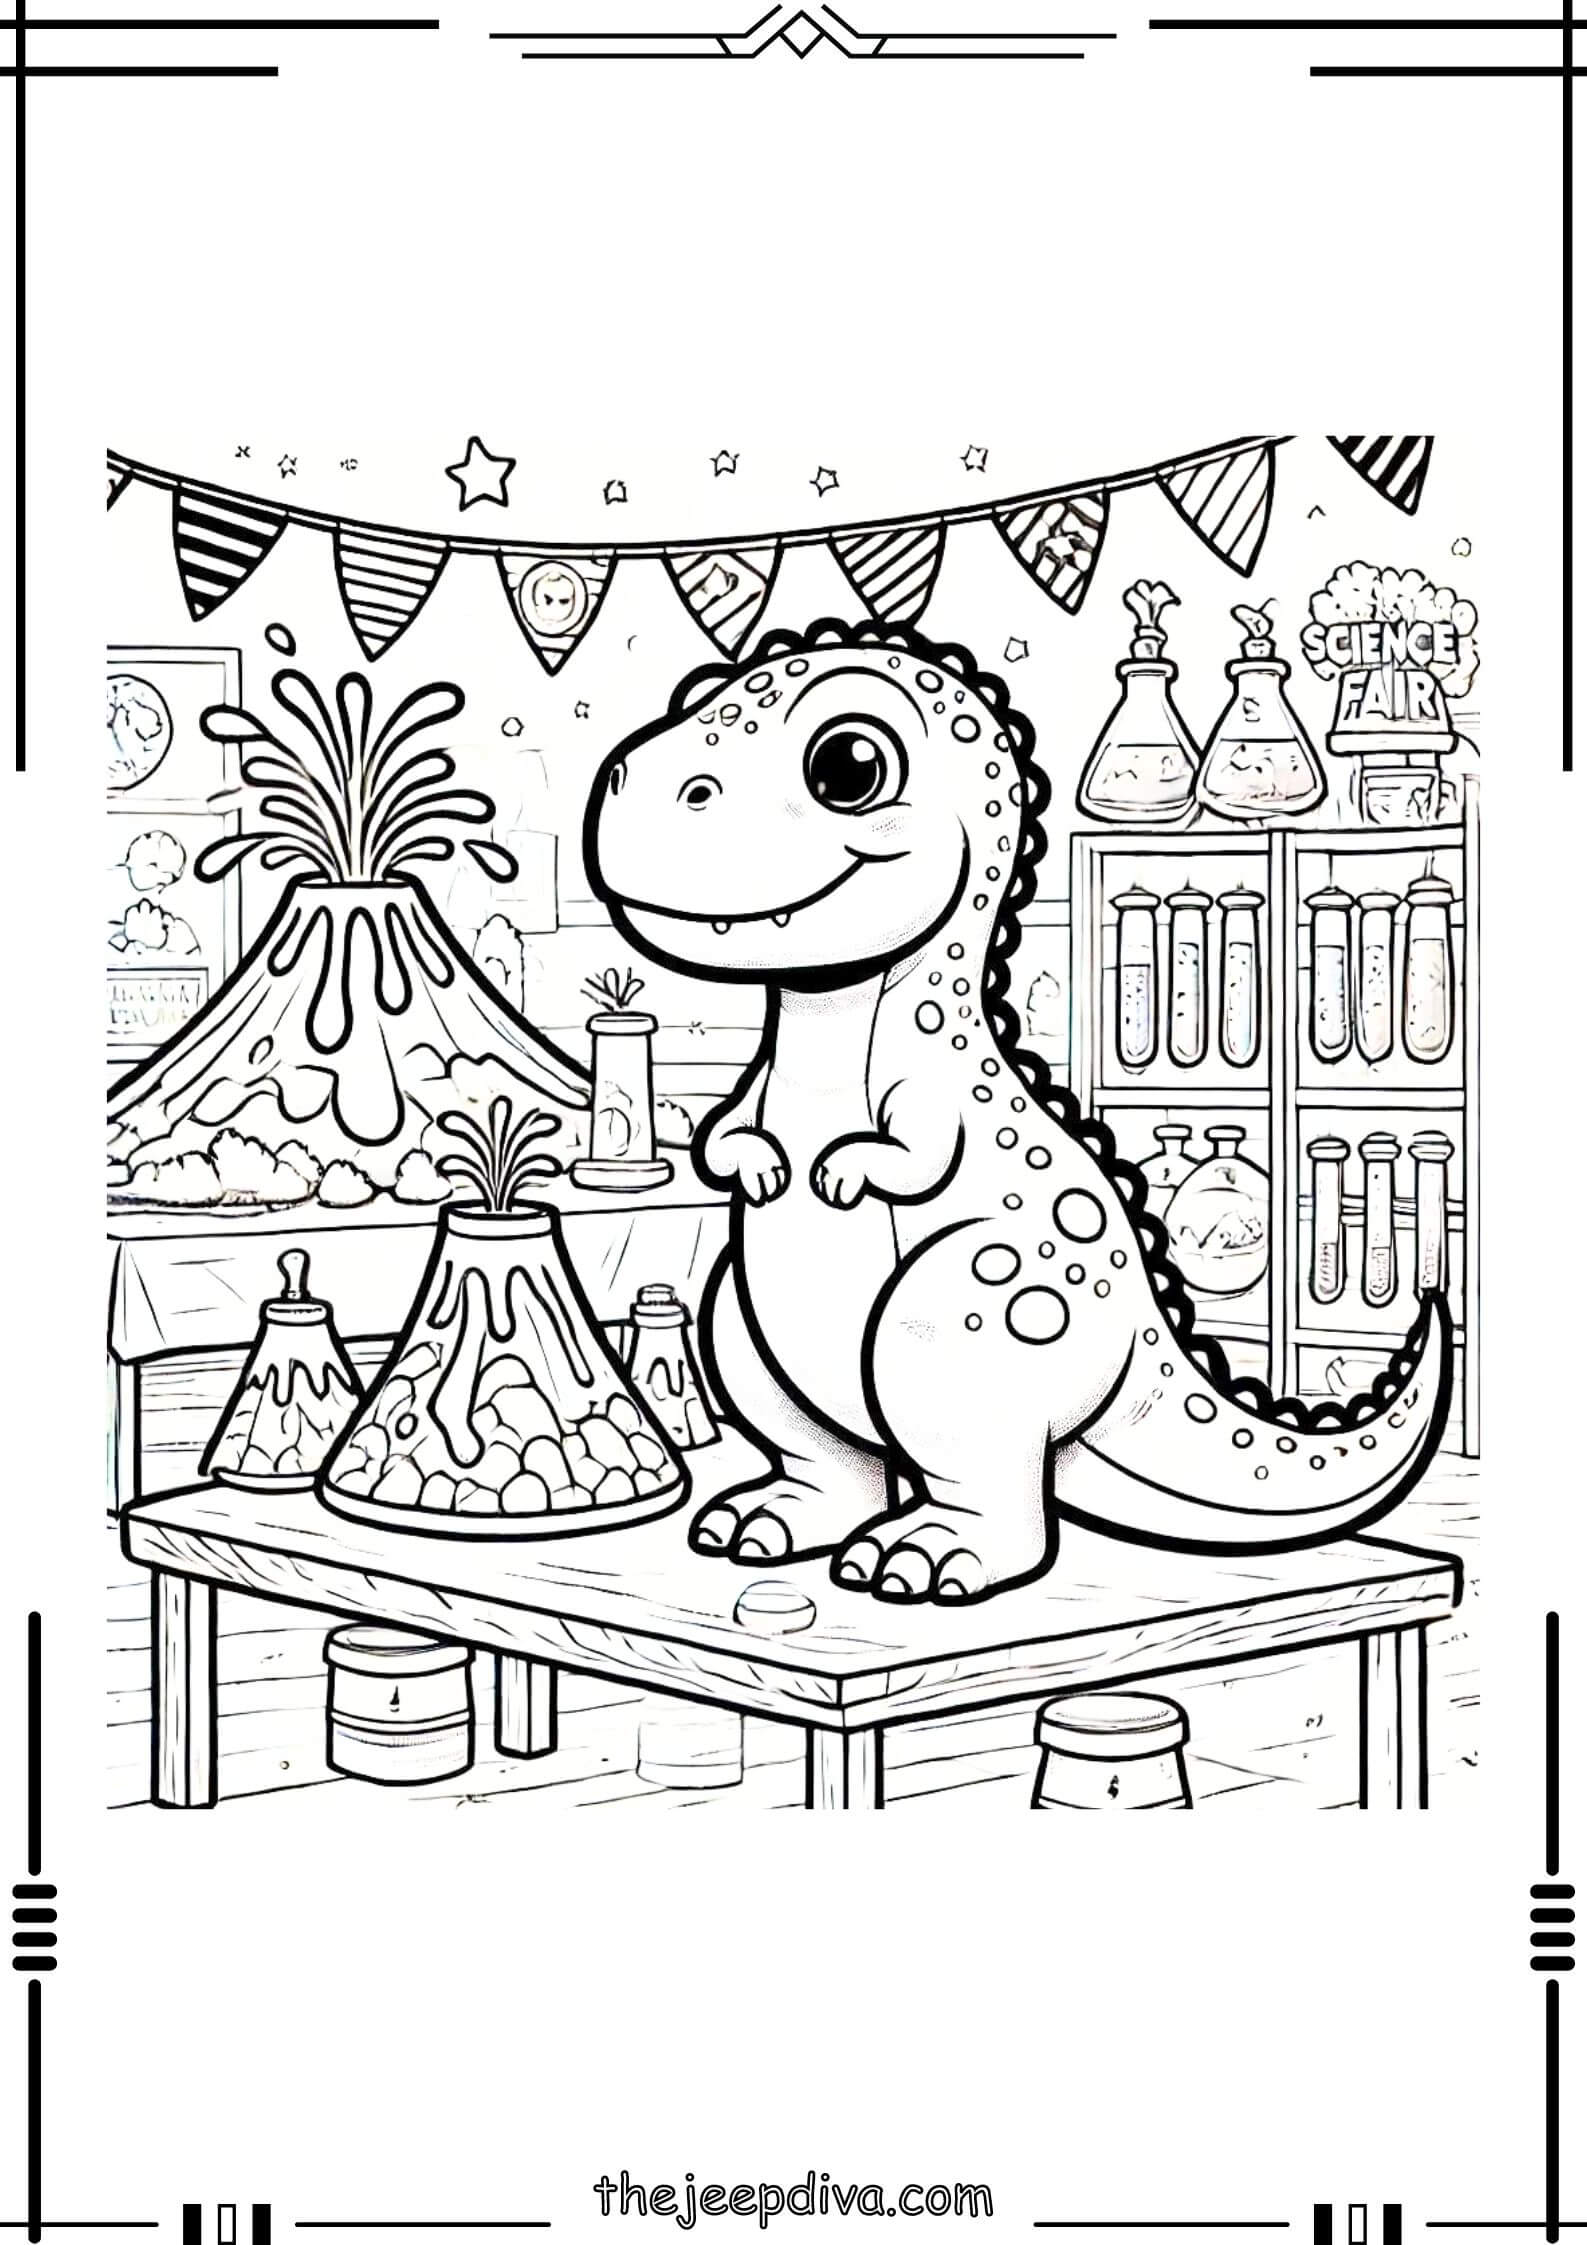 Dinosaur-Colouring-Pages-Hard-20